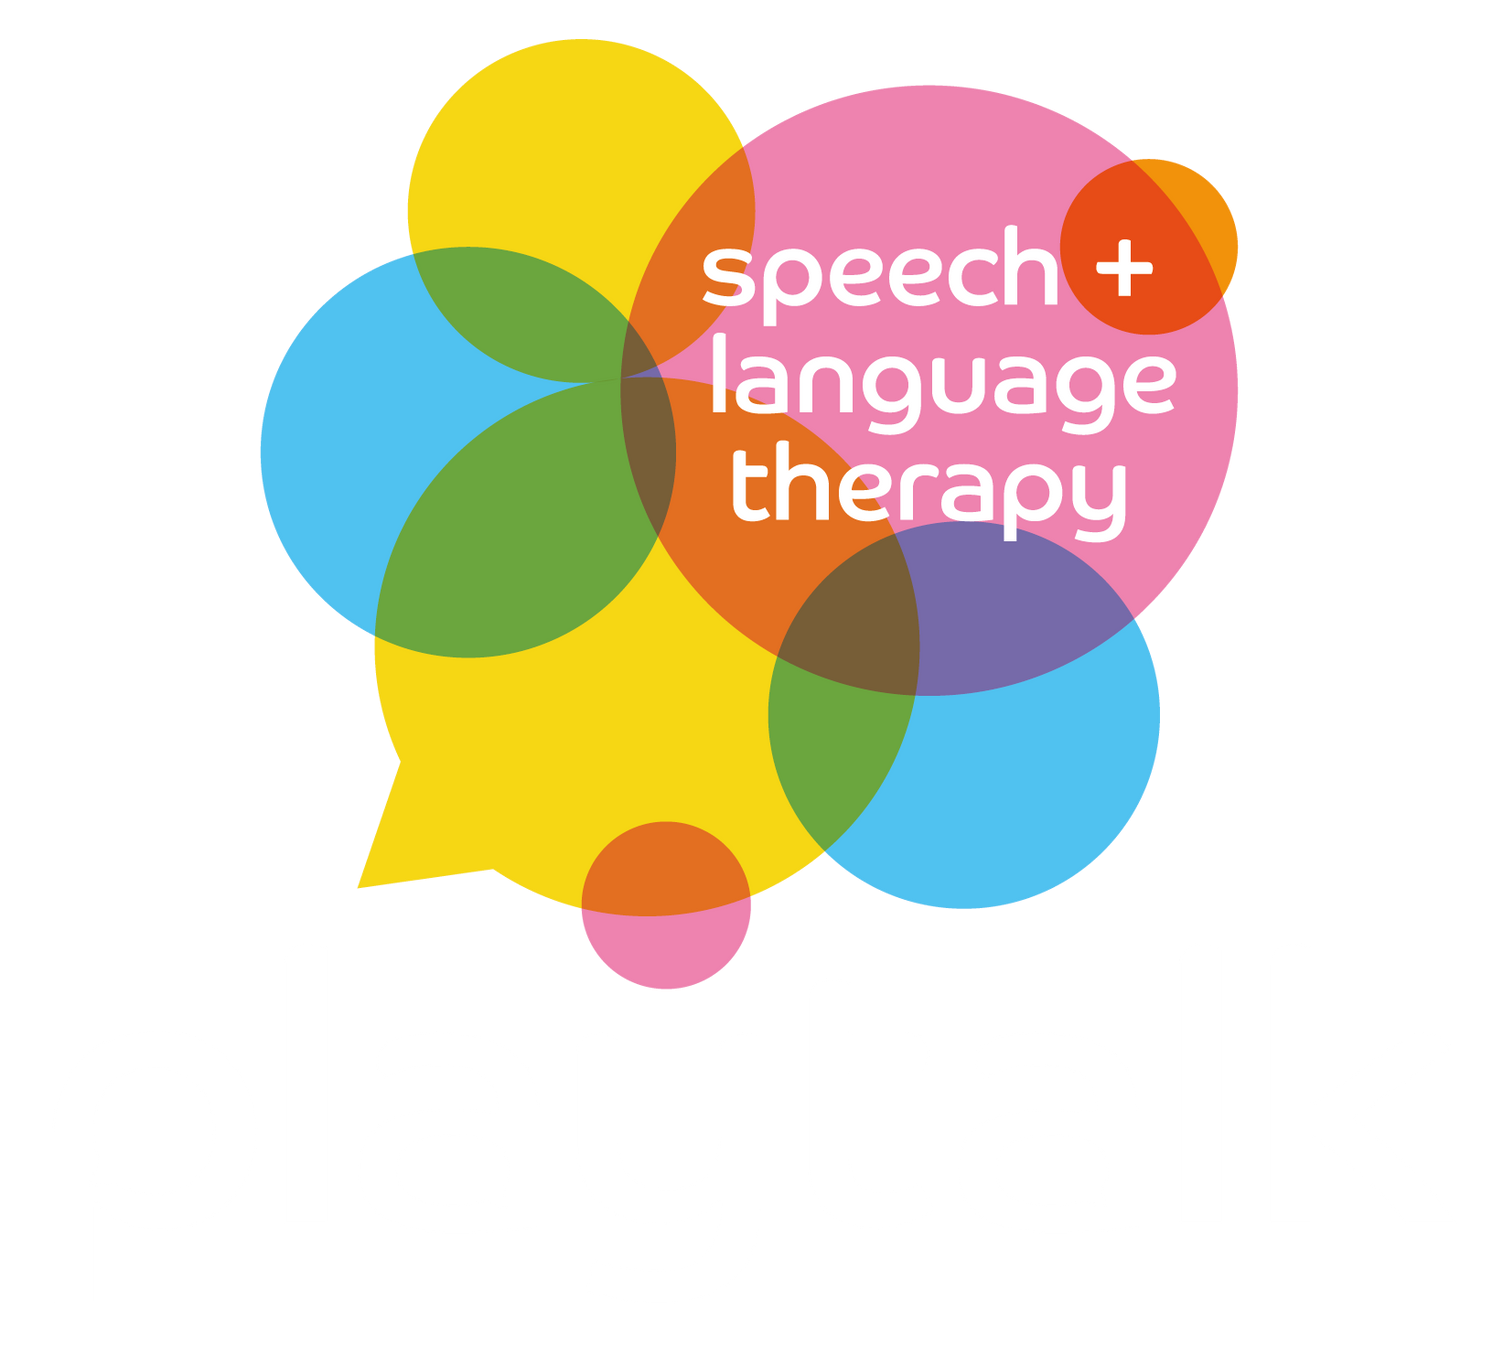 Speech and Language Therapy with PlayTalk